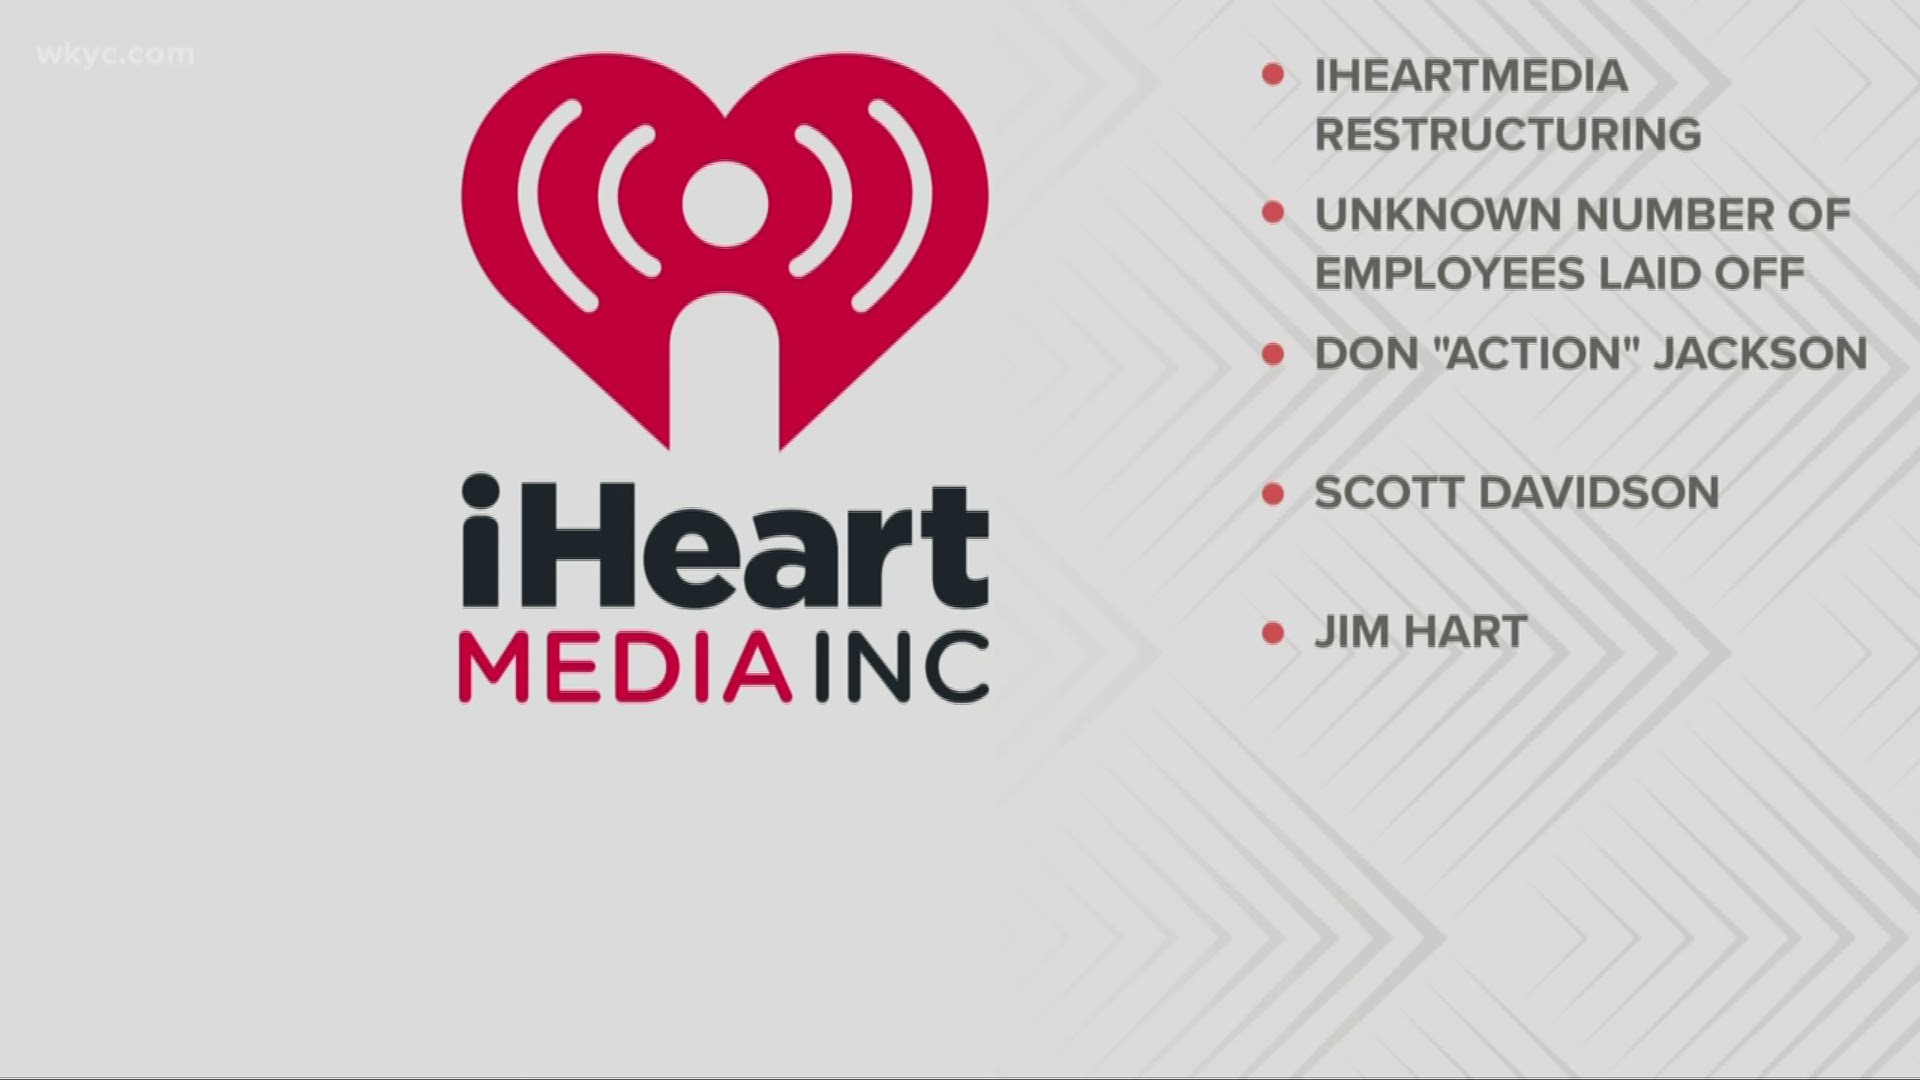 iHeart owns more than 850 radio stations across the country, including 11 in Cleveland alone. It is unknown at this time how many local people lost their jobs.